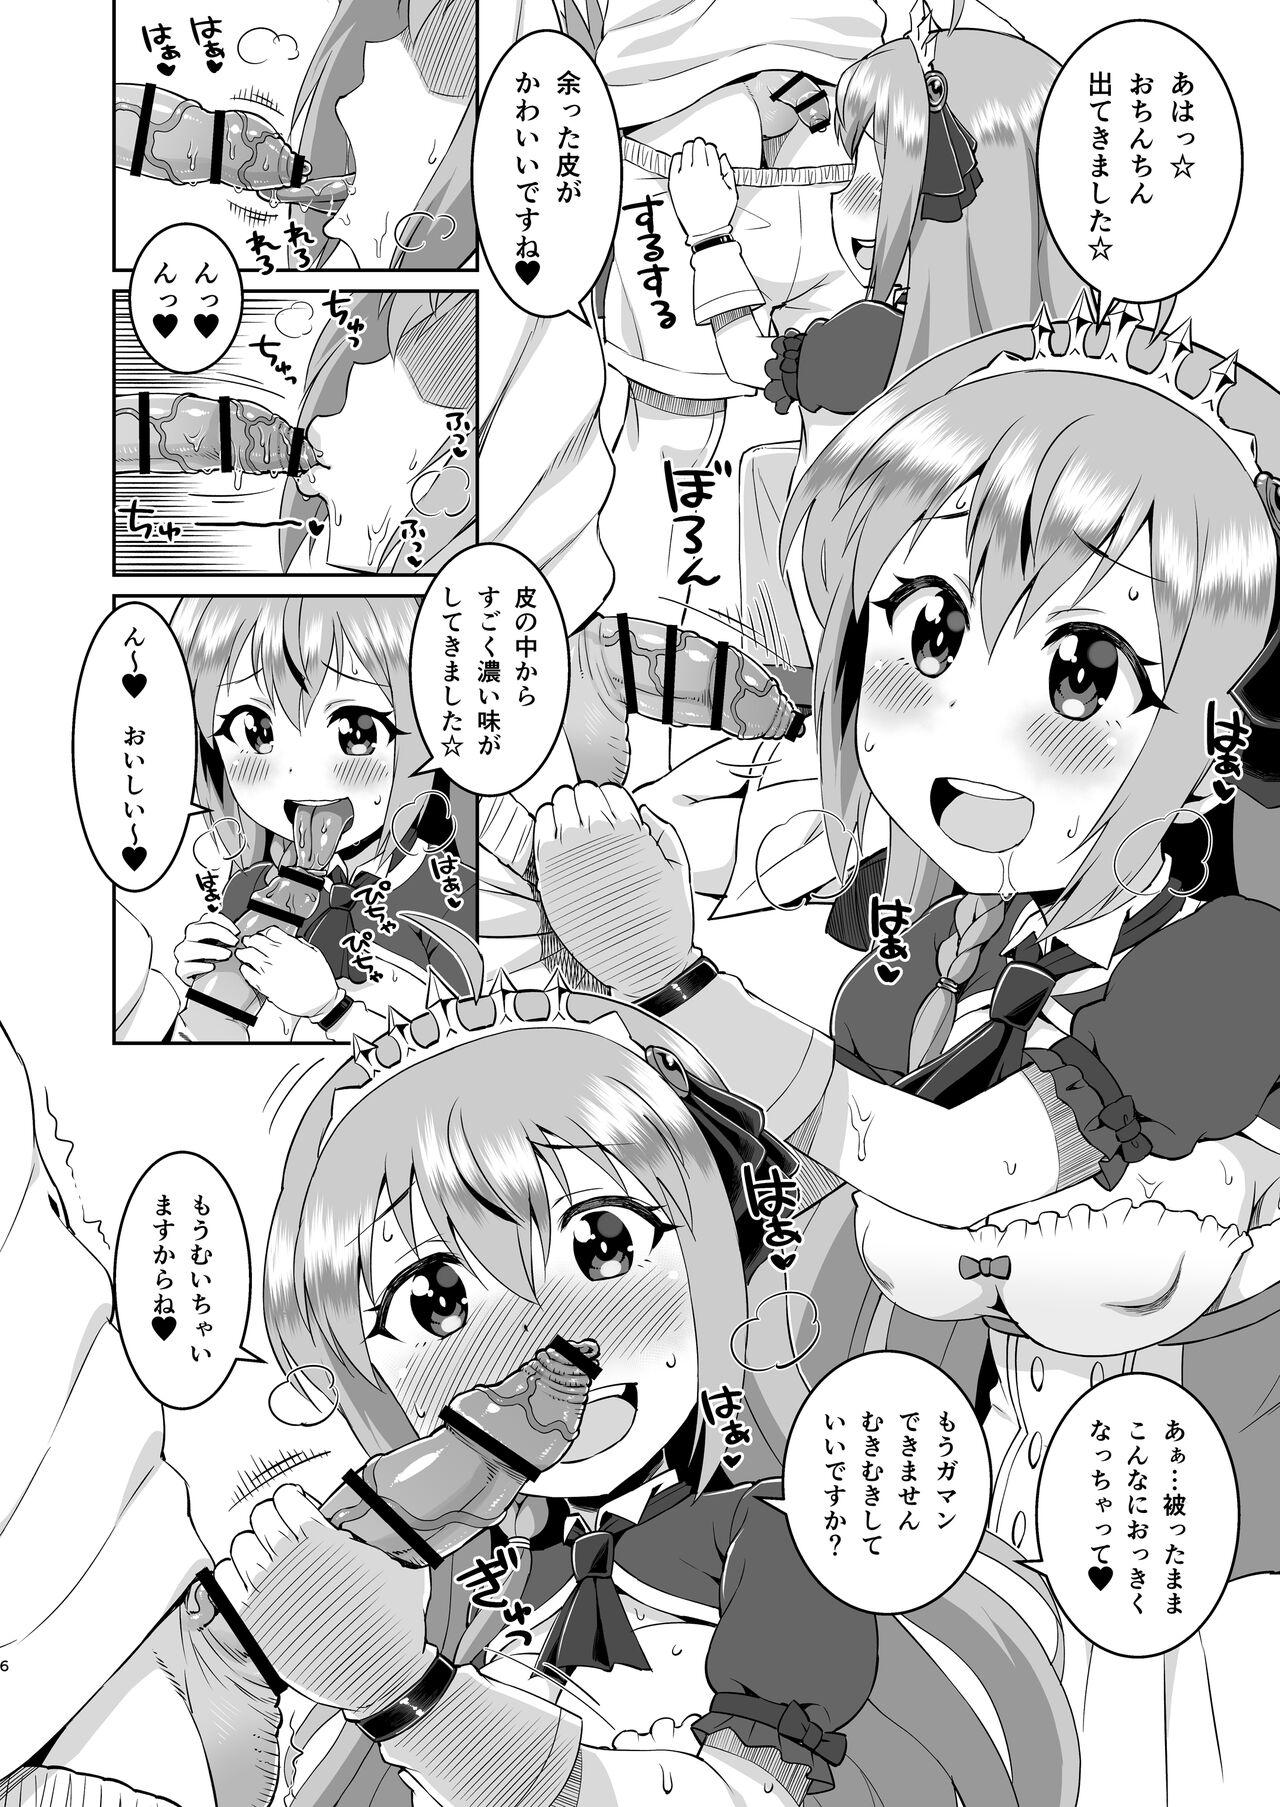 Gaping Peko-chan is so cute, isn't she? - Princess connect 3some - Page 5